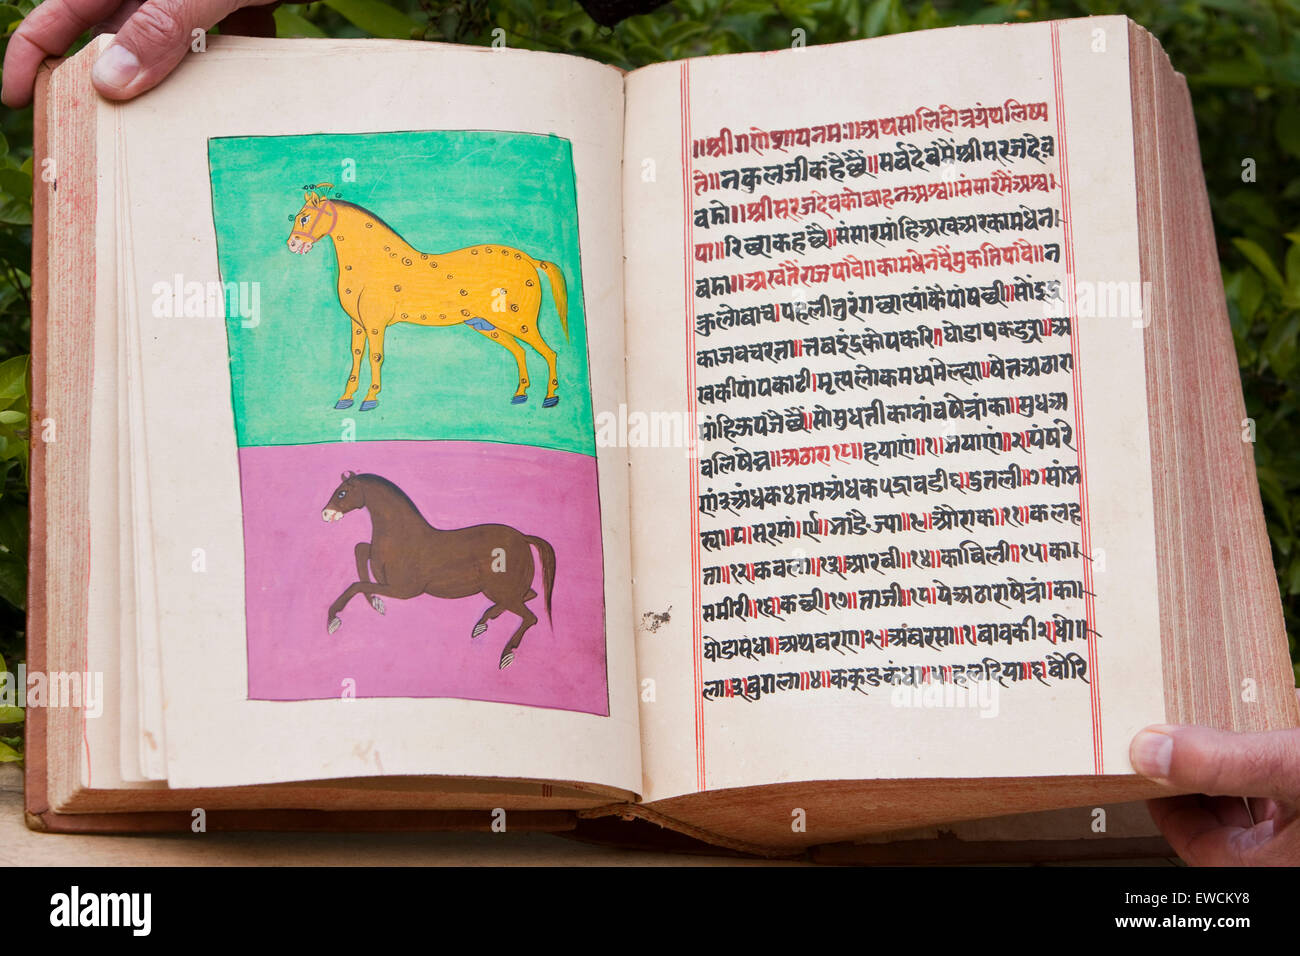 Asvasastram (Science of horses). An Illustrated book of Equinology. Rajasthan, India Stock Photo